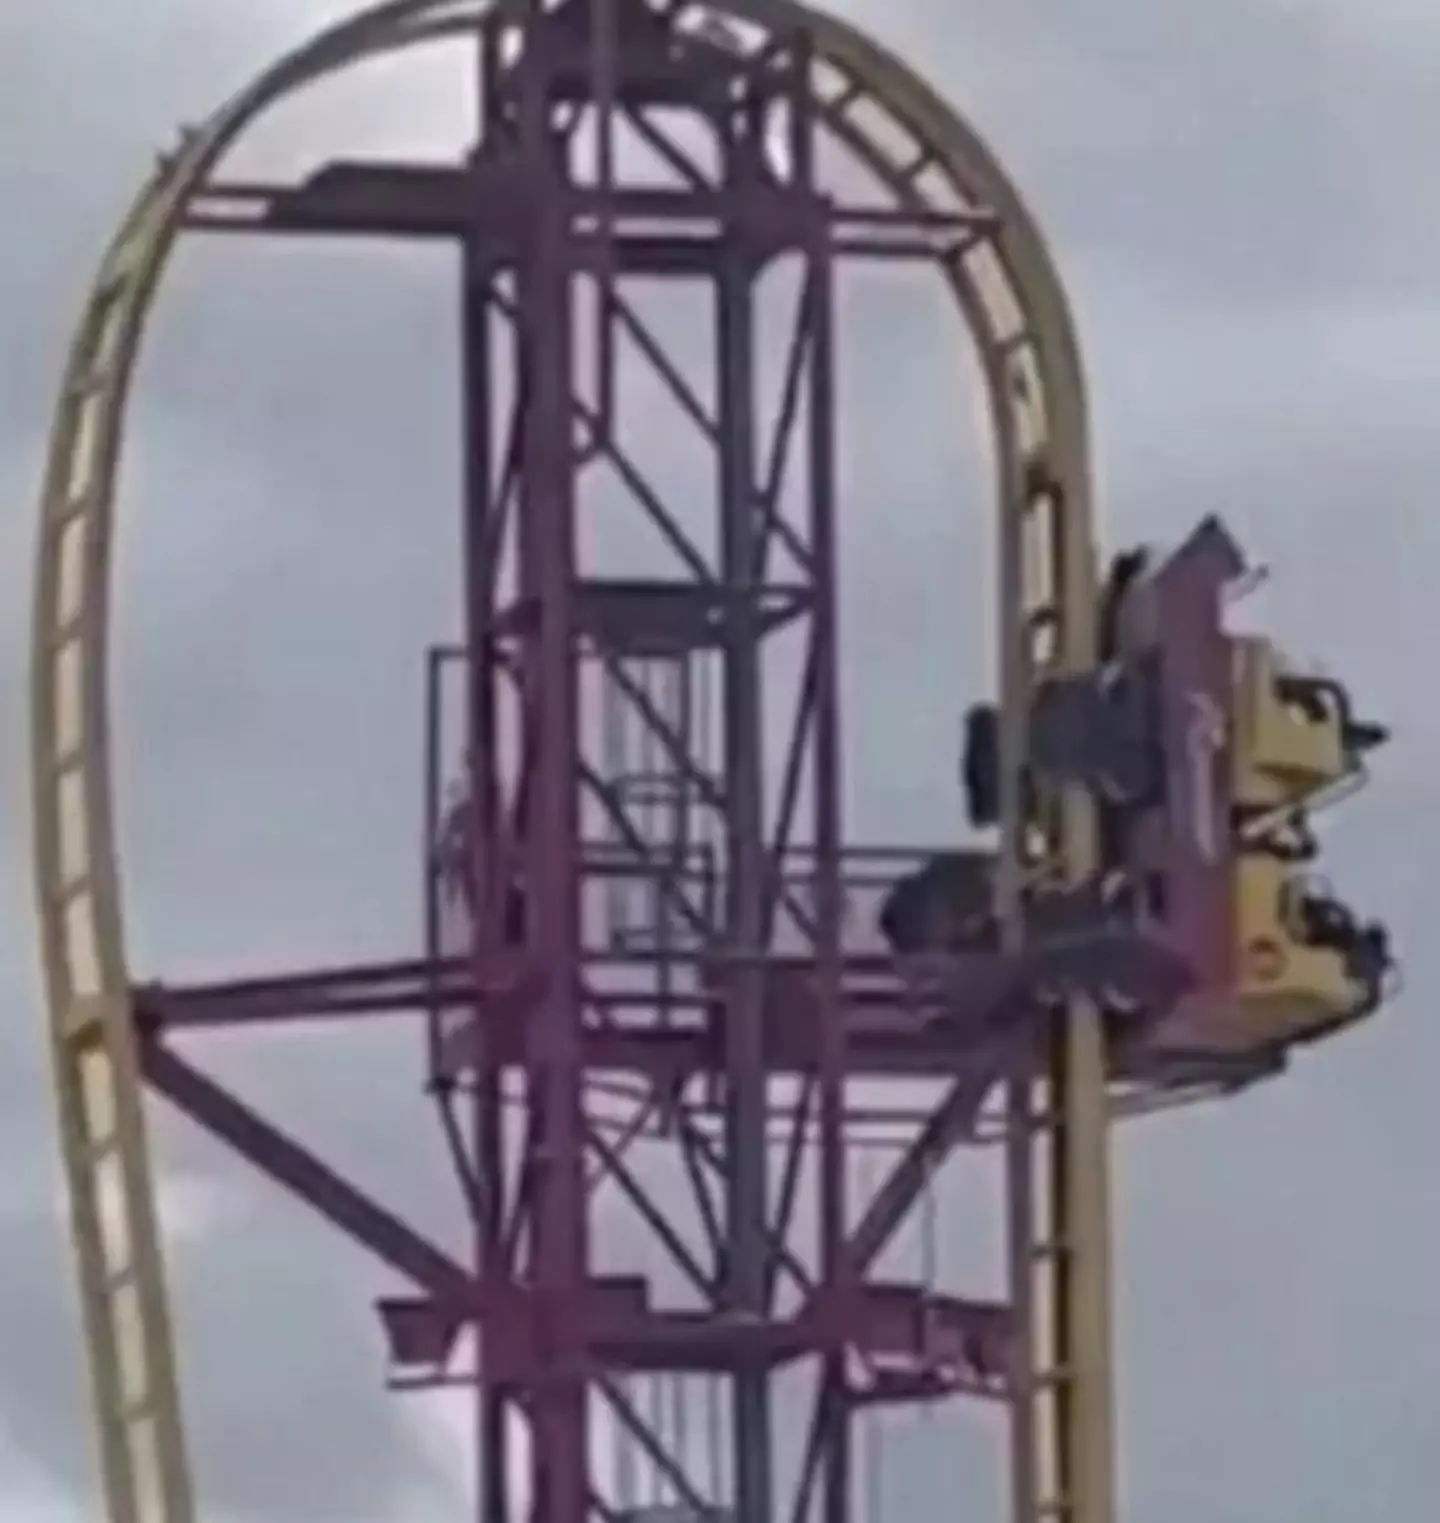 Rollercoaster riders were left stuck at the top of a 72ft ride at the Adventure Island theme park in Essex.